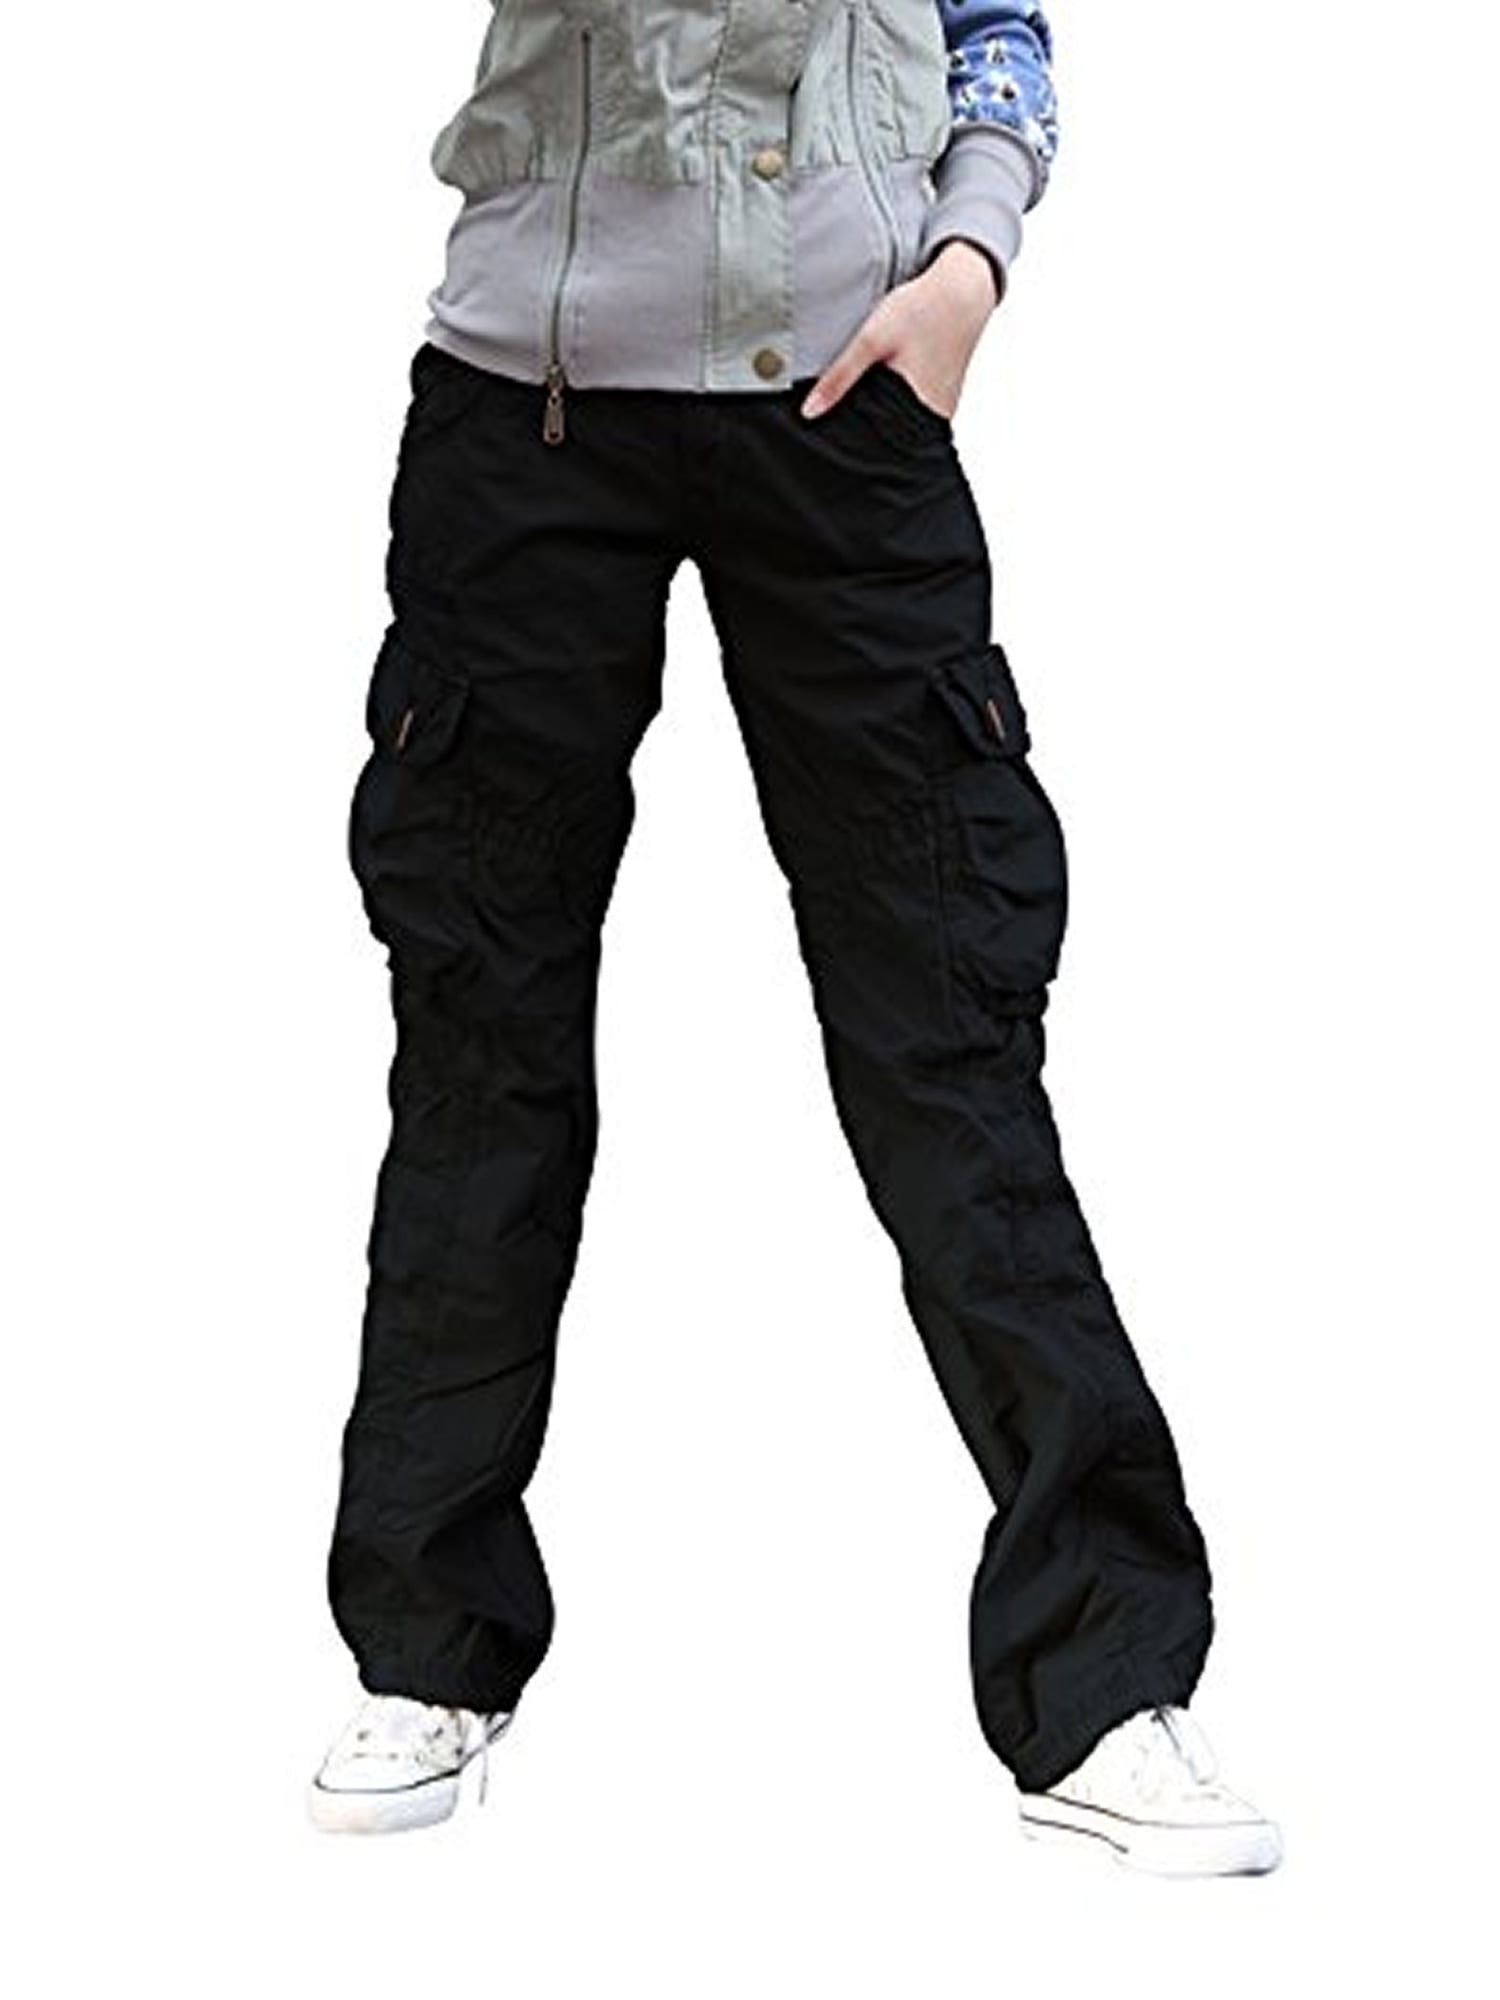 Womens Loose Pants Cargo Hip Hop Trousers Outdoor Military Pocket Vintage Black